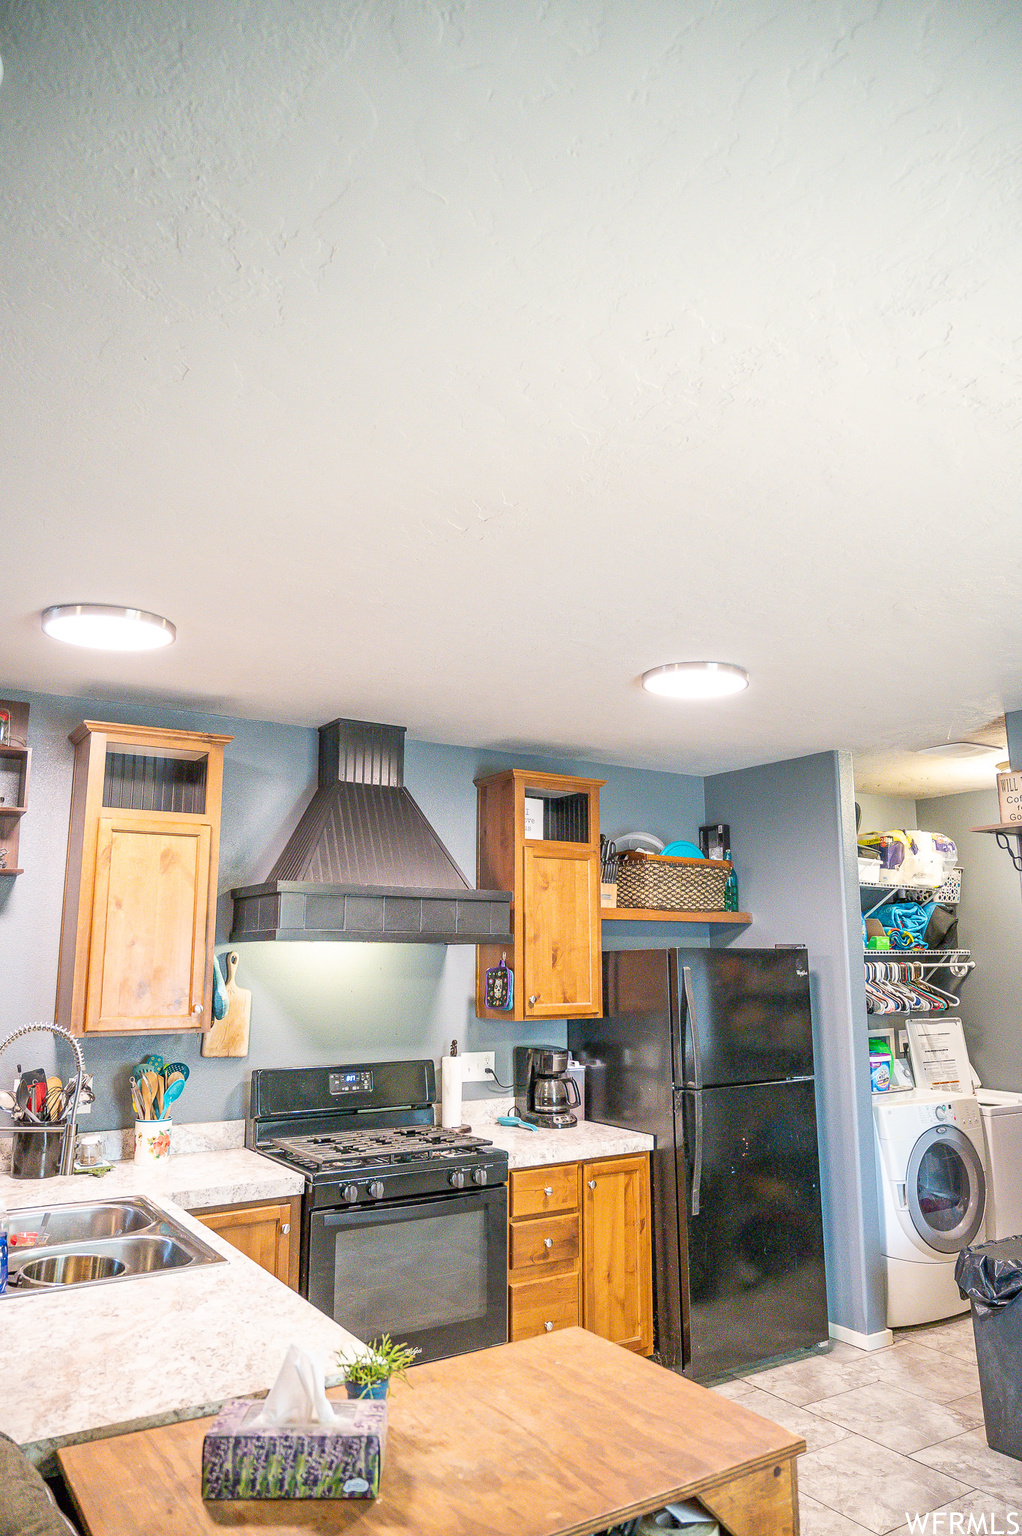 Kitchen with washer / clothes dryer, sink, wall chimney range hood, light tile floors, and black appliances